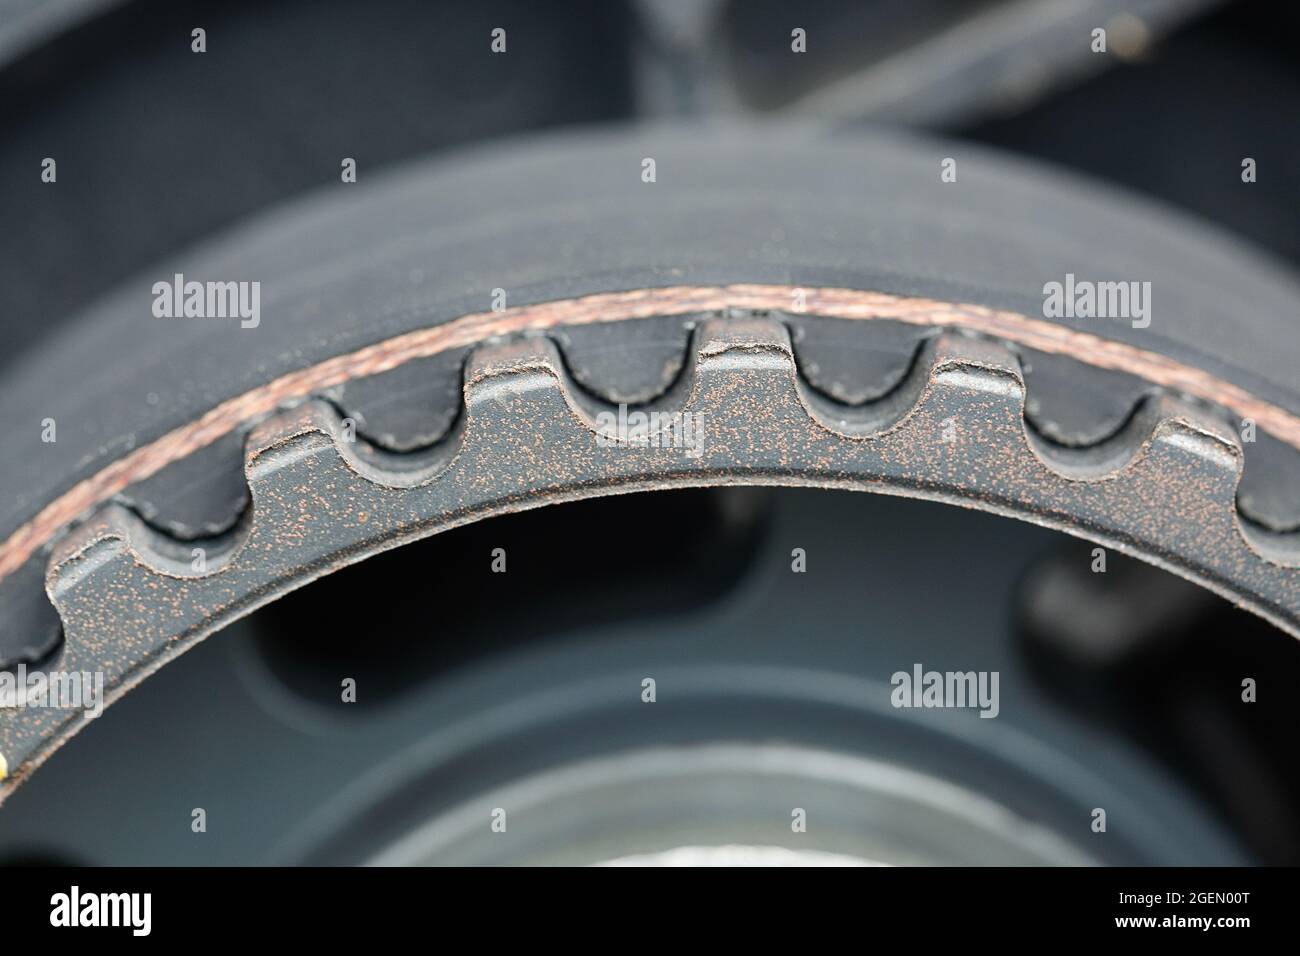 teeth of Timing belt and camshaft sprocket in car engine. Stock Photo